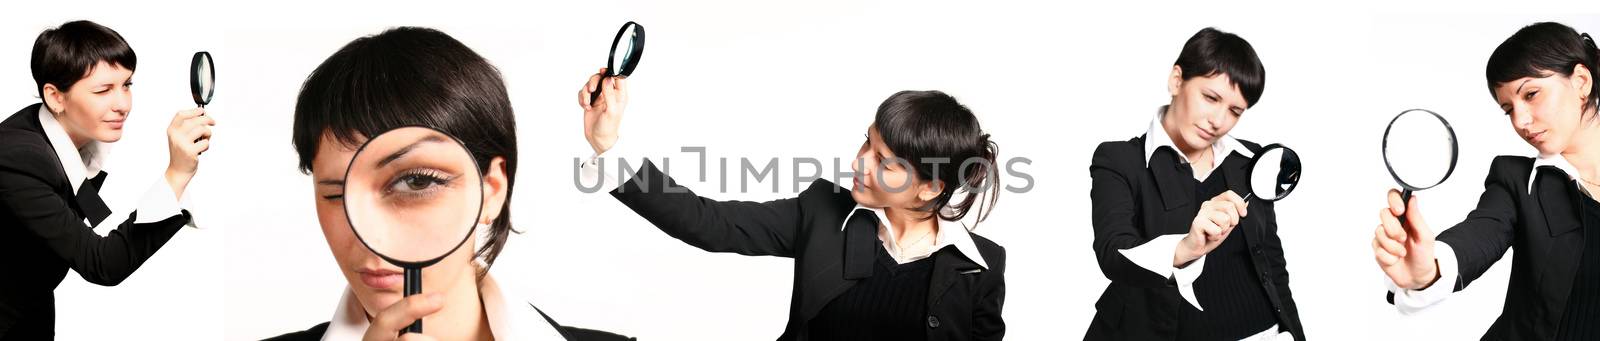 Business woman holding magnifying glass, set of pictures isolated on white background